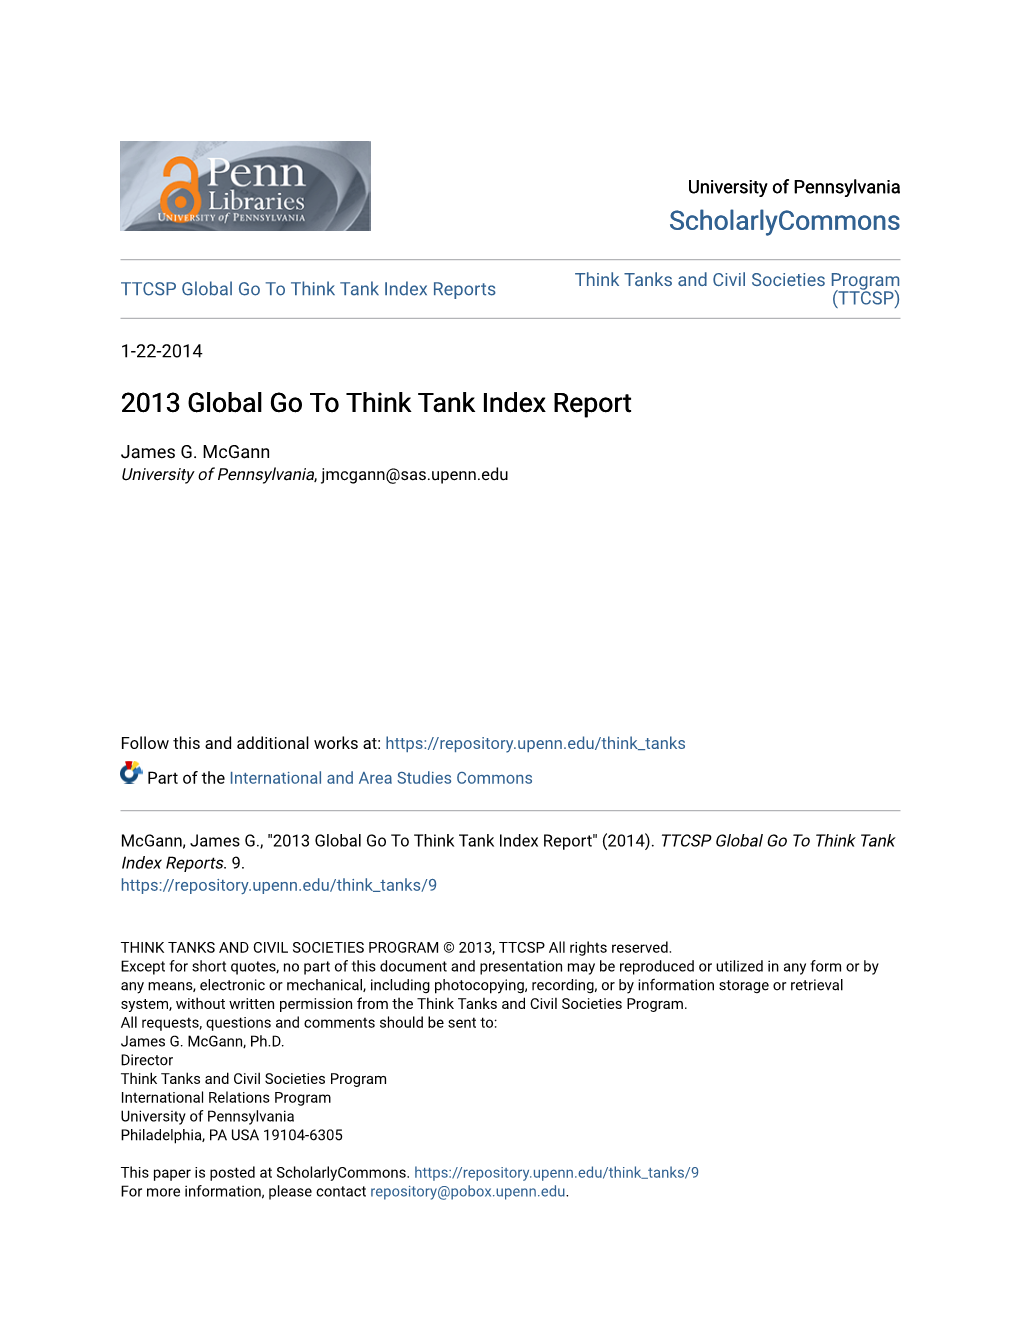 2013 Global Go to Think Tank Index Report